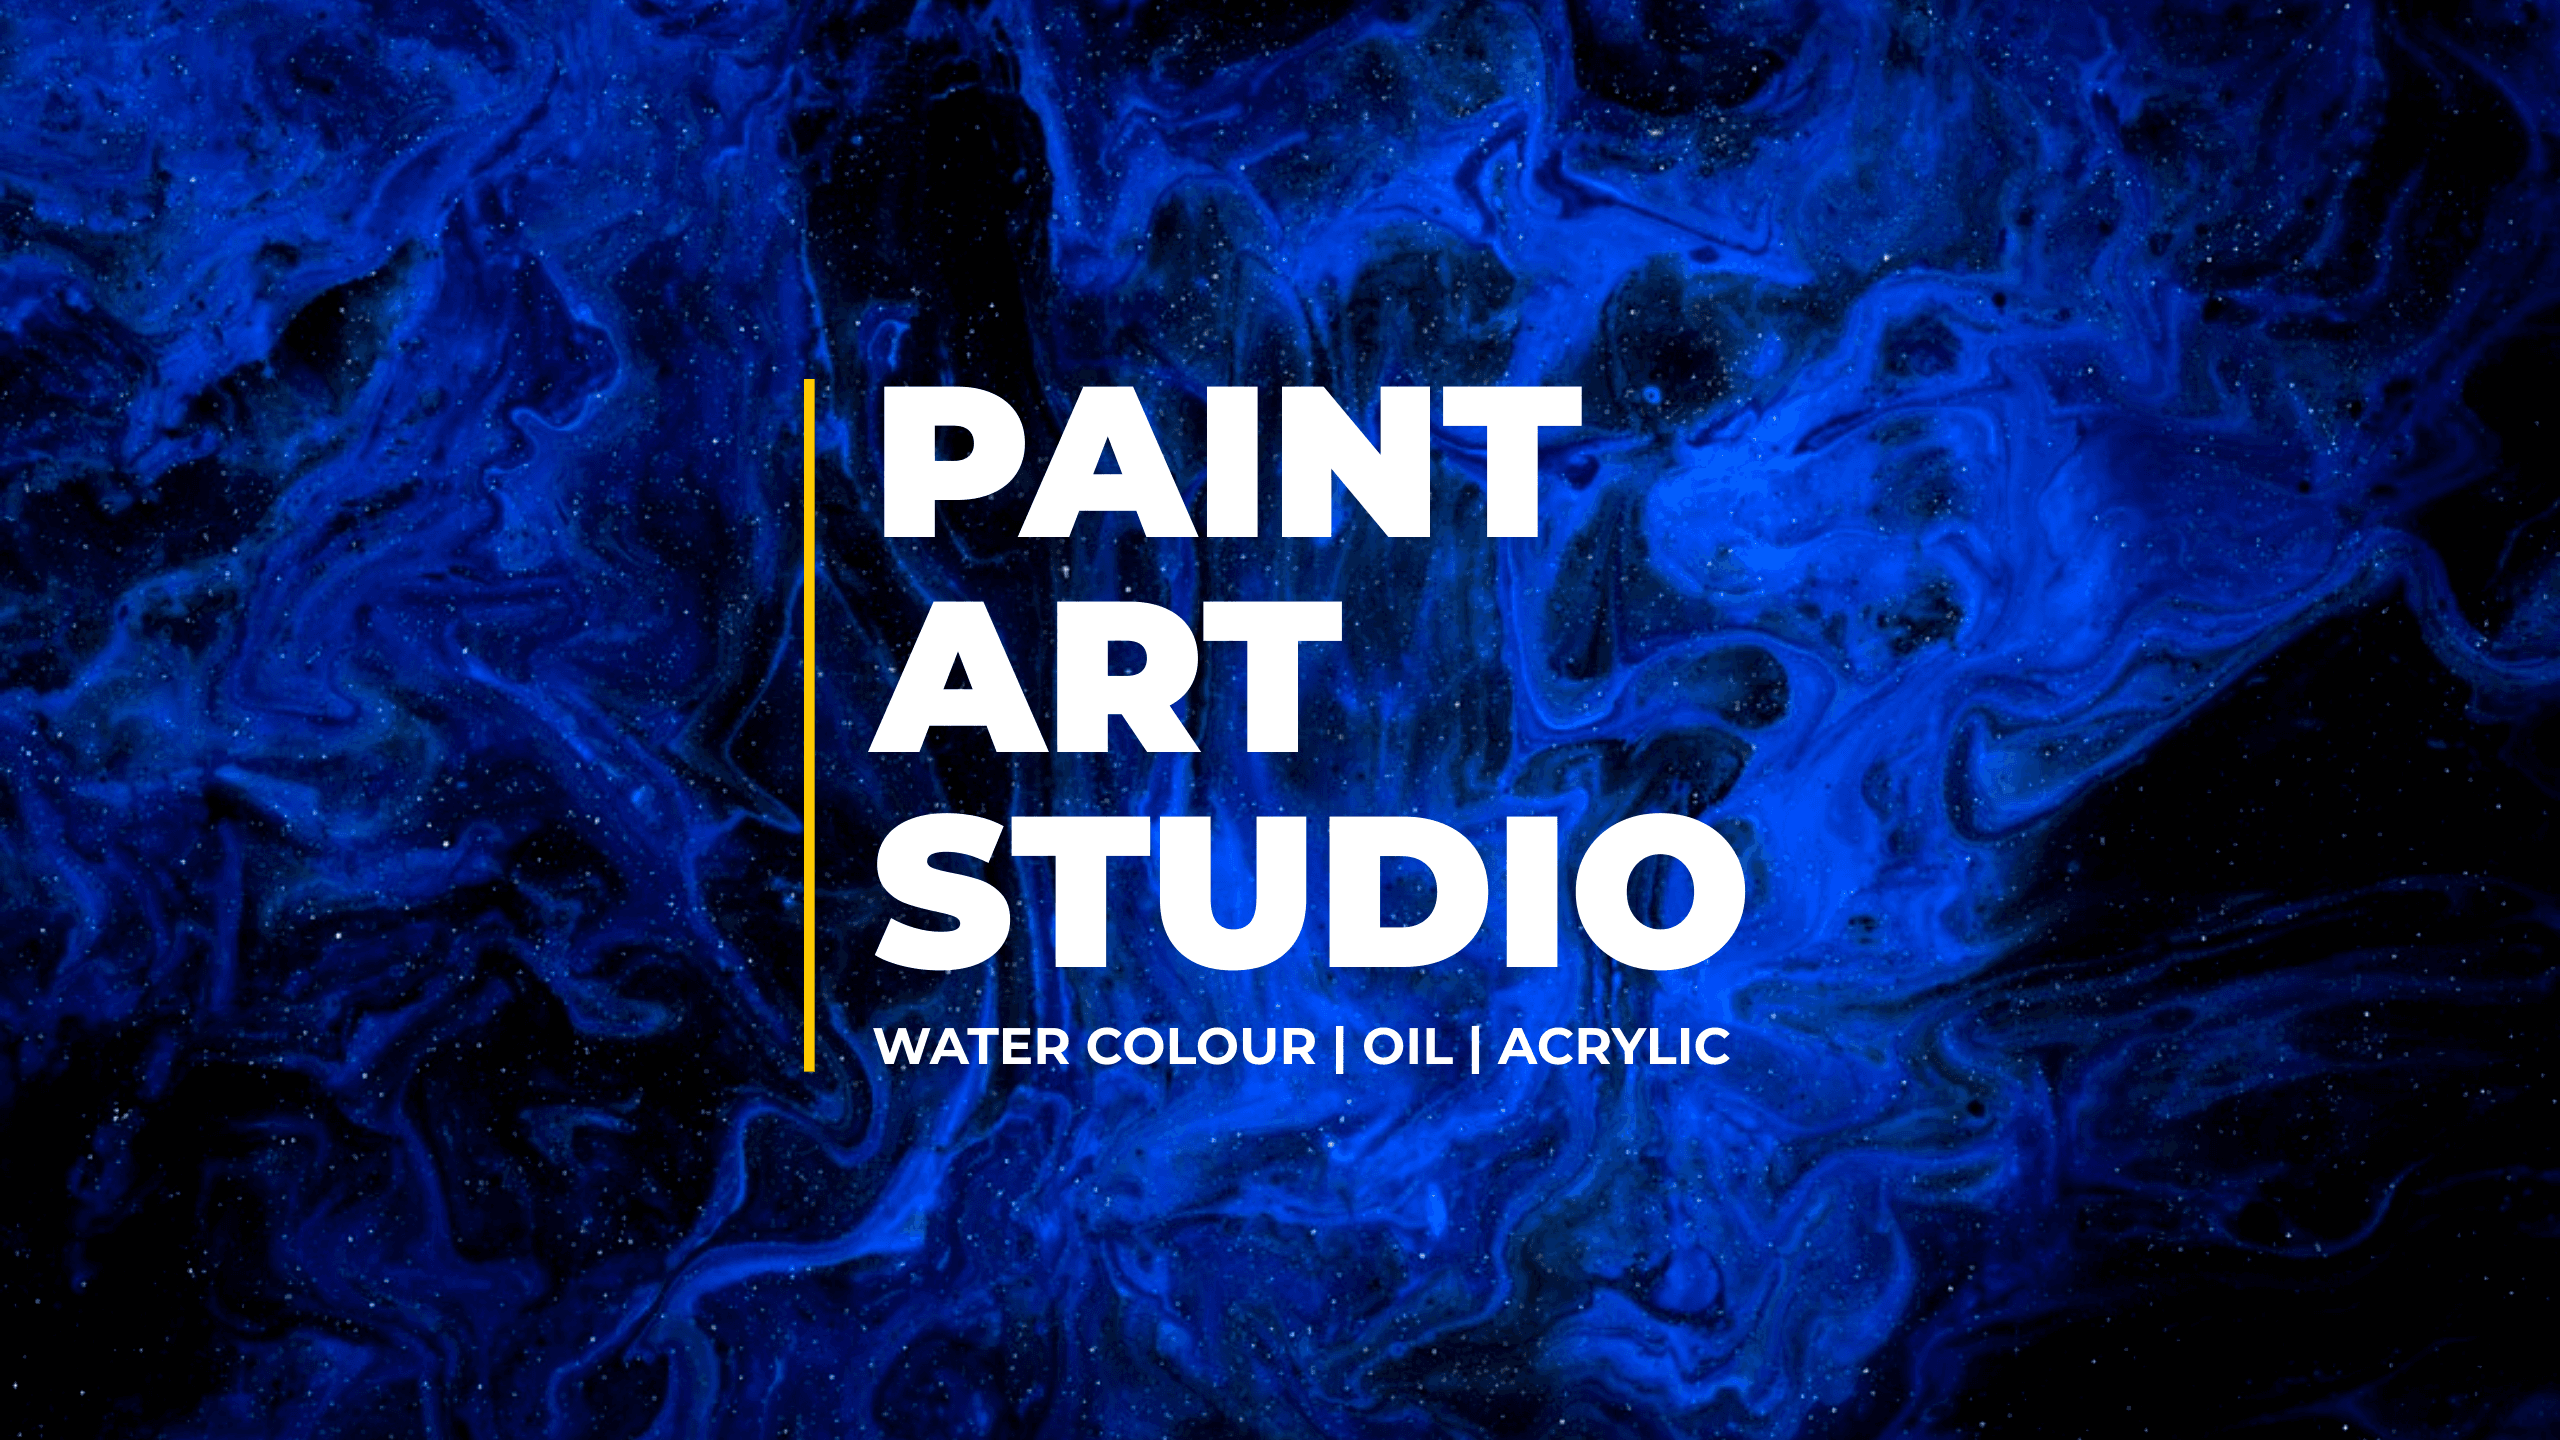 blue-oil-and-acrylic-water-color-paint-art-studio-youtube-channel-art-thumbnail-img